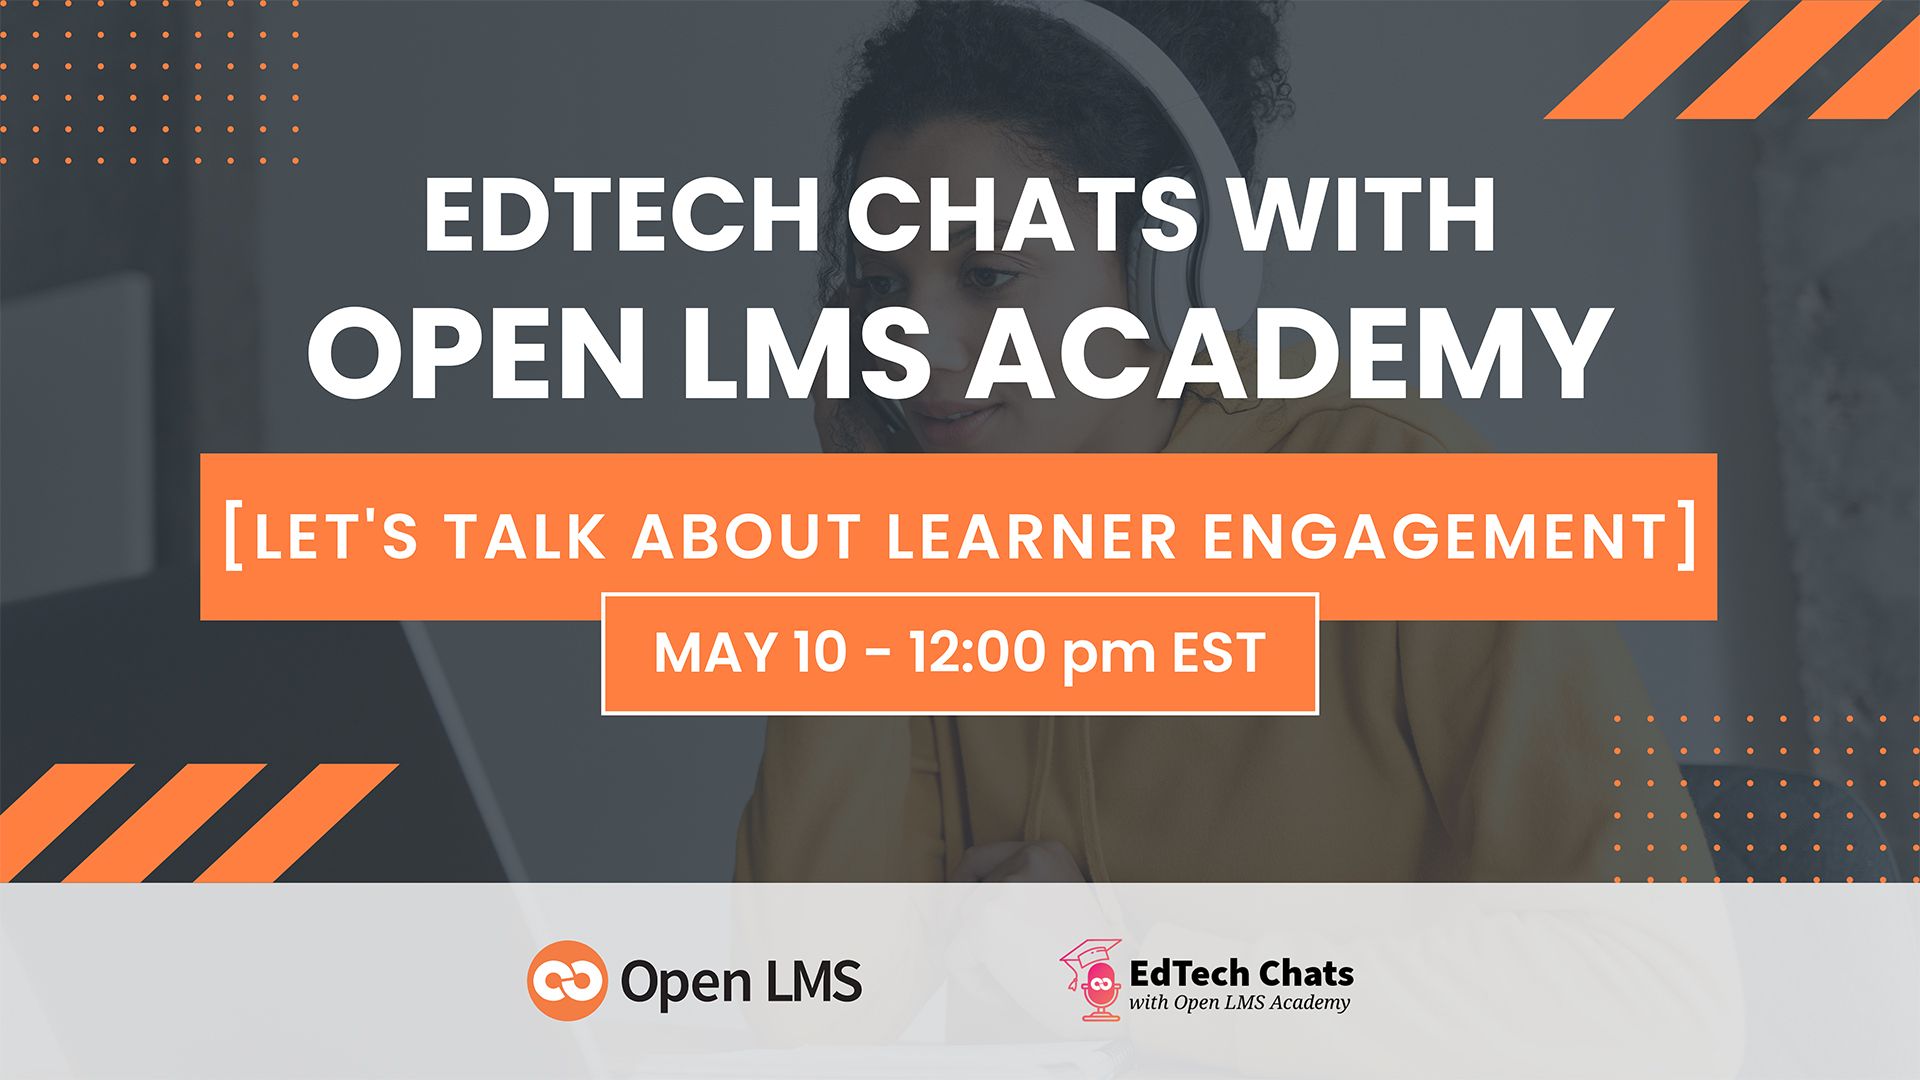 EdTech Chats with Open LMS Academy [Let's Talk About Learner Engagement]